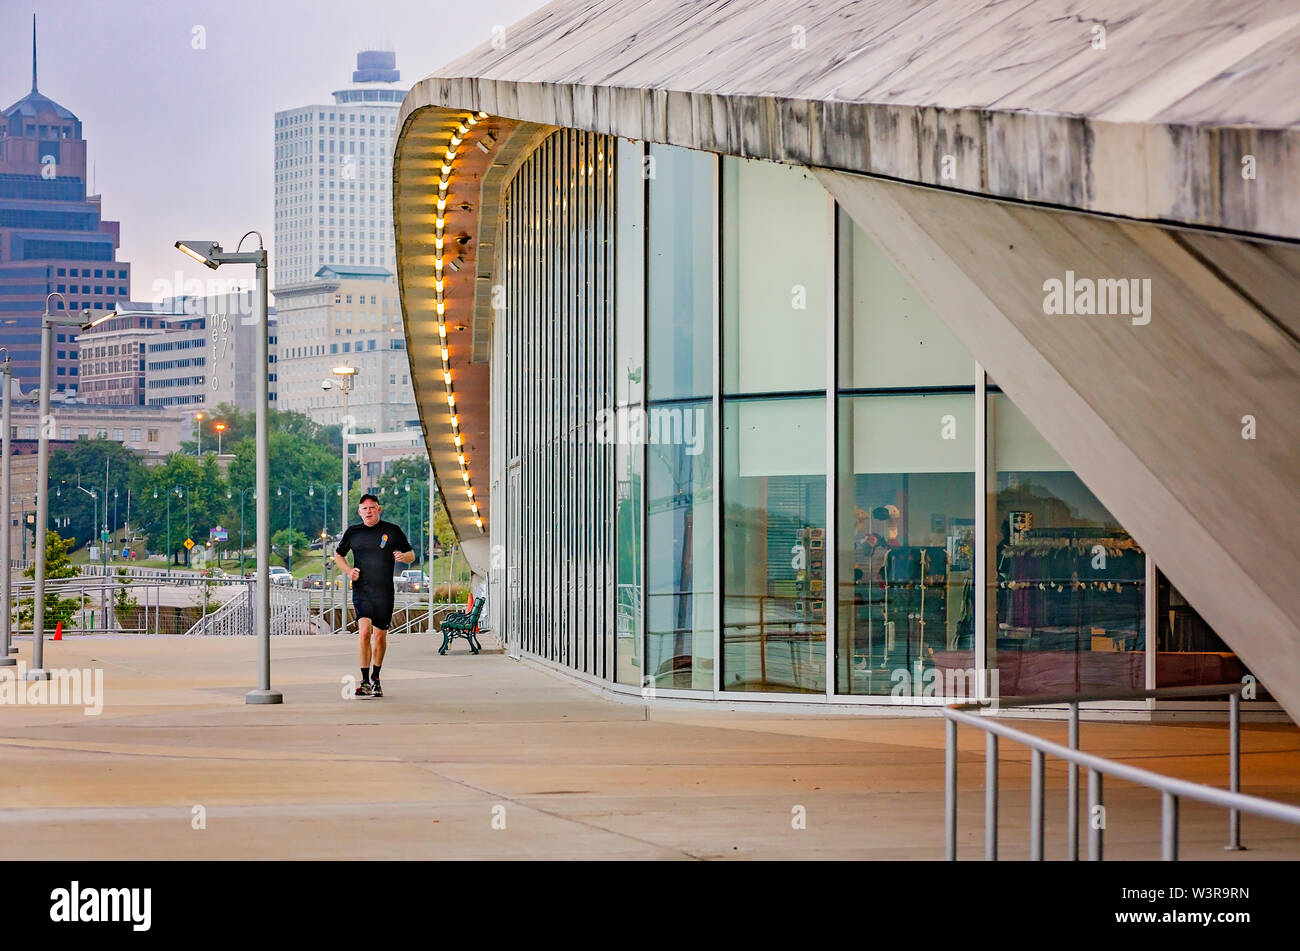 A man jogs past Riverfront Bar & Grill at Beale Street Landing, Sept. 6, 2015, in Memphis, Tennessee. Stock Photo